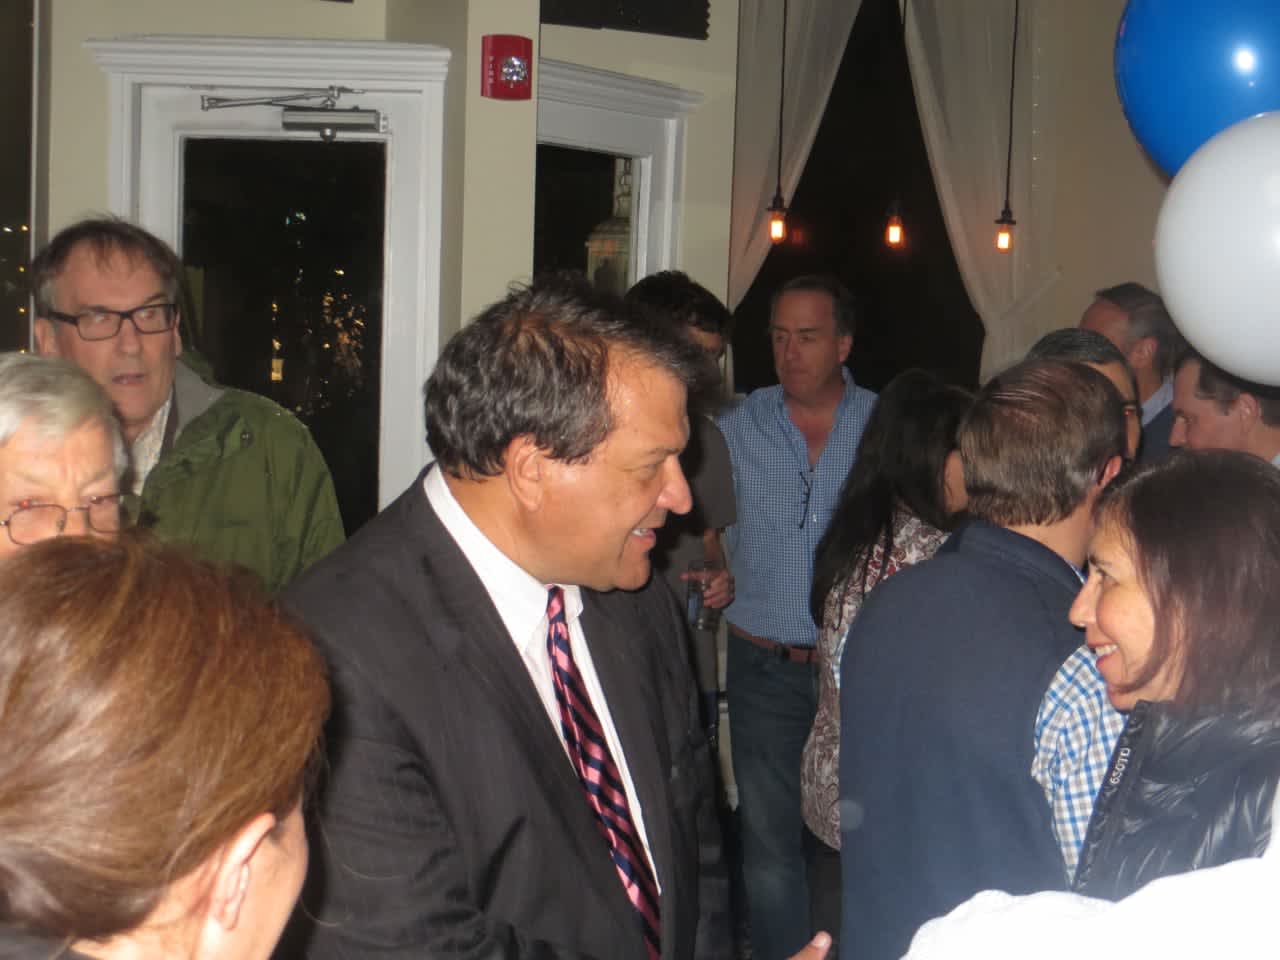 George Latimer arrives at his Election Night Celebration in White Plains late Tuesday night.